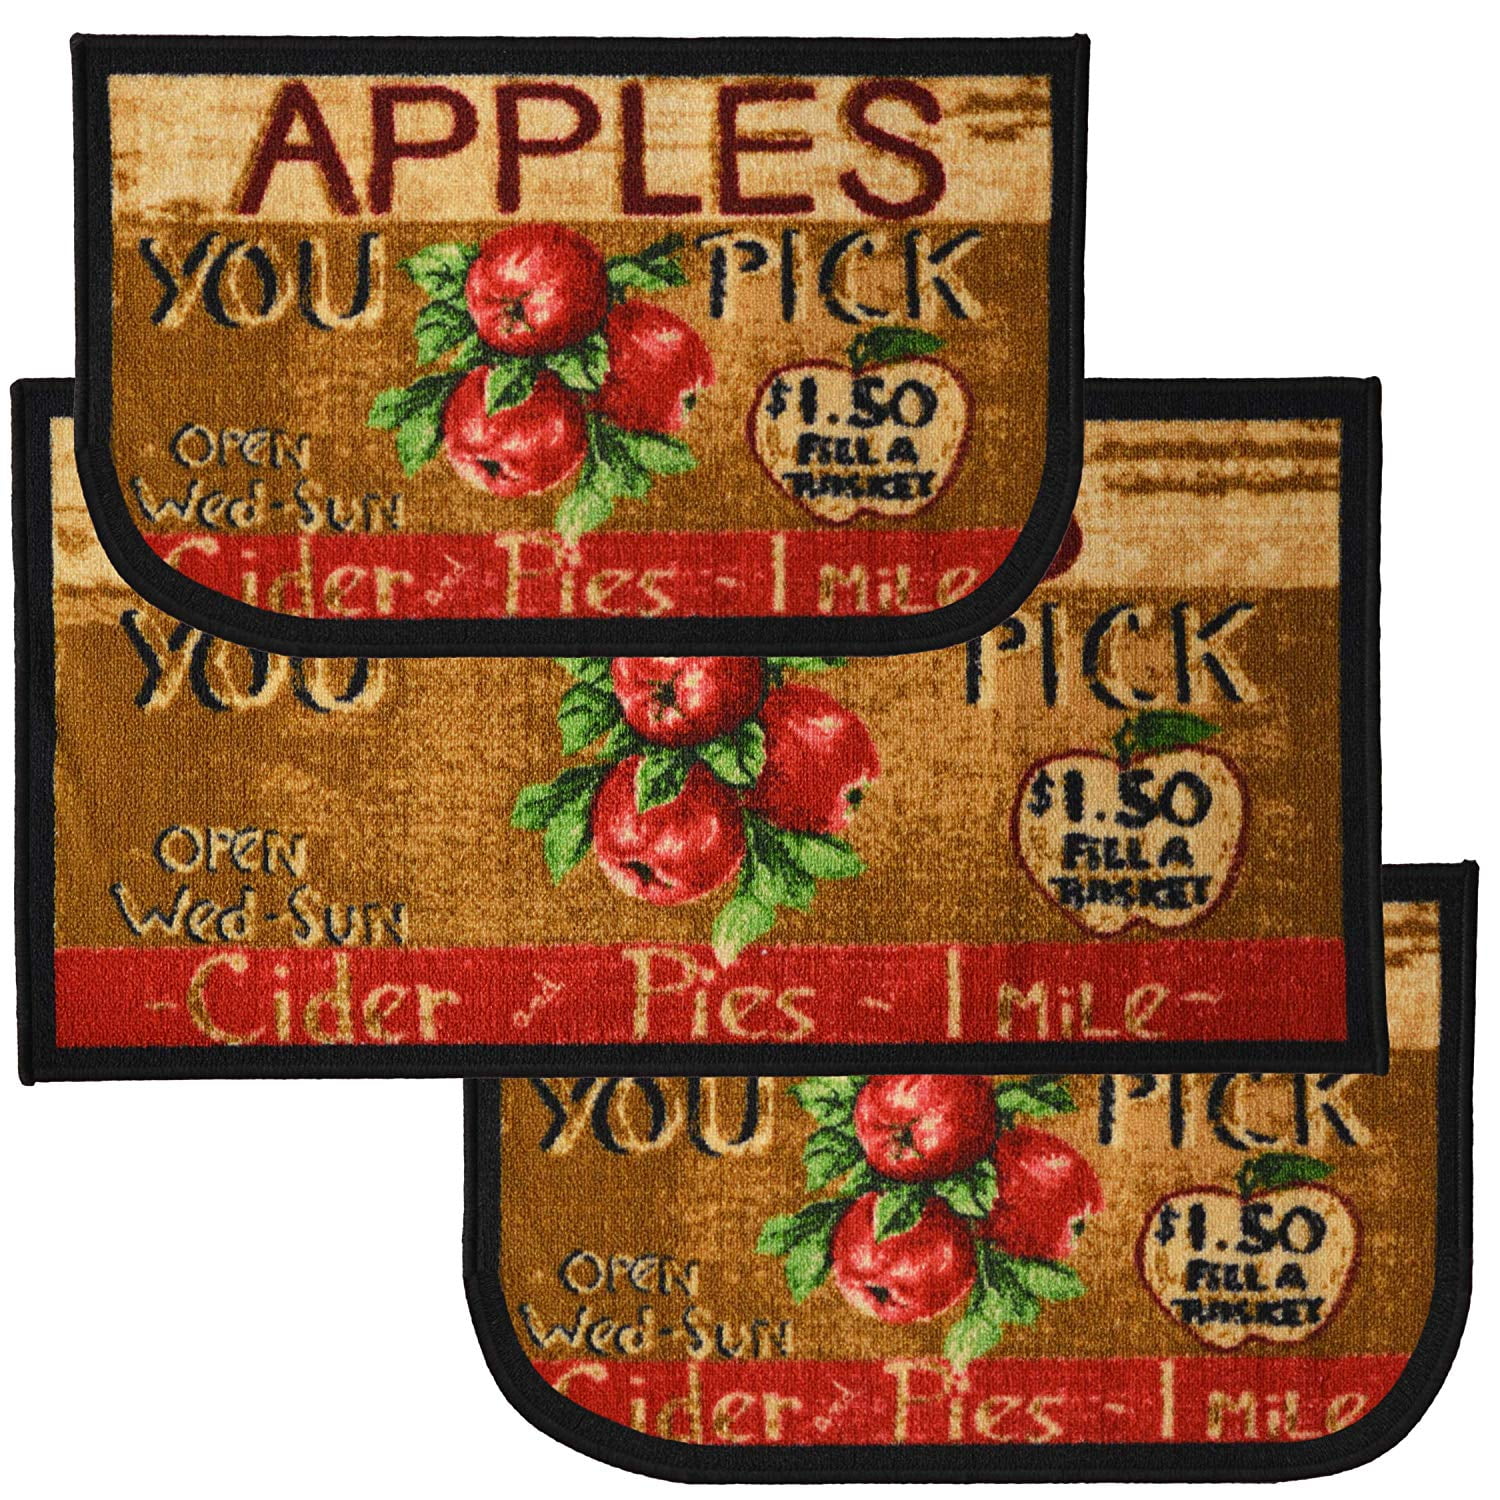 PRINTED NYLON KITCHEN RUG 18x30" D Shape,HD nonskid BUNCH OF APPLES ON BEIGE 